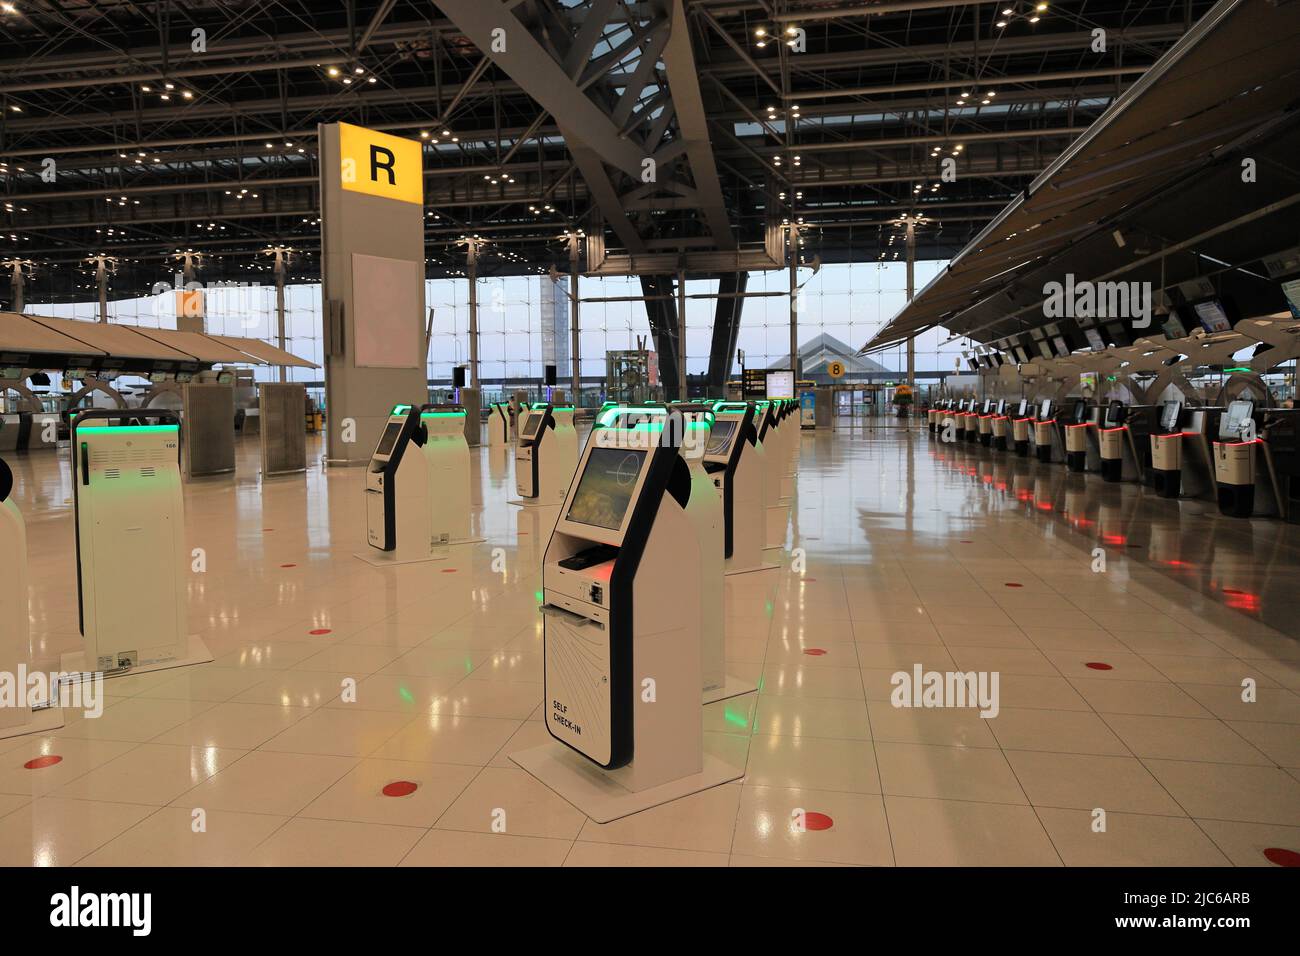 Self Check-in or Self service machine and help desk kiosk at airport for check in, printing boarding pass or buying ticket. Stock Photo